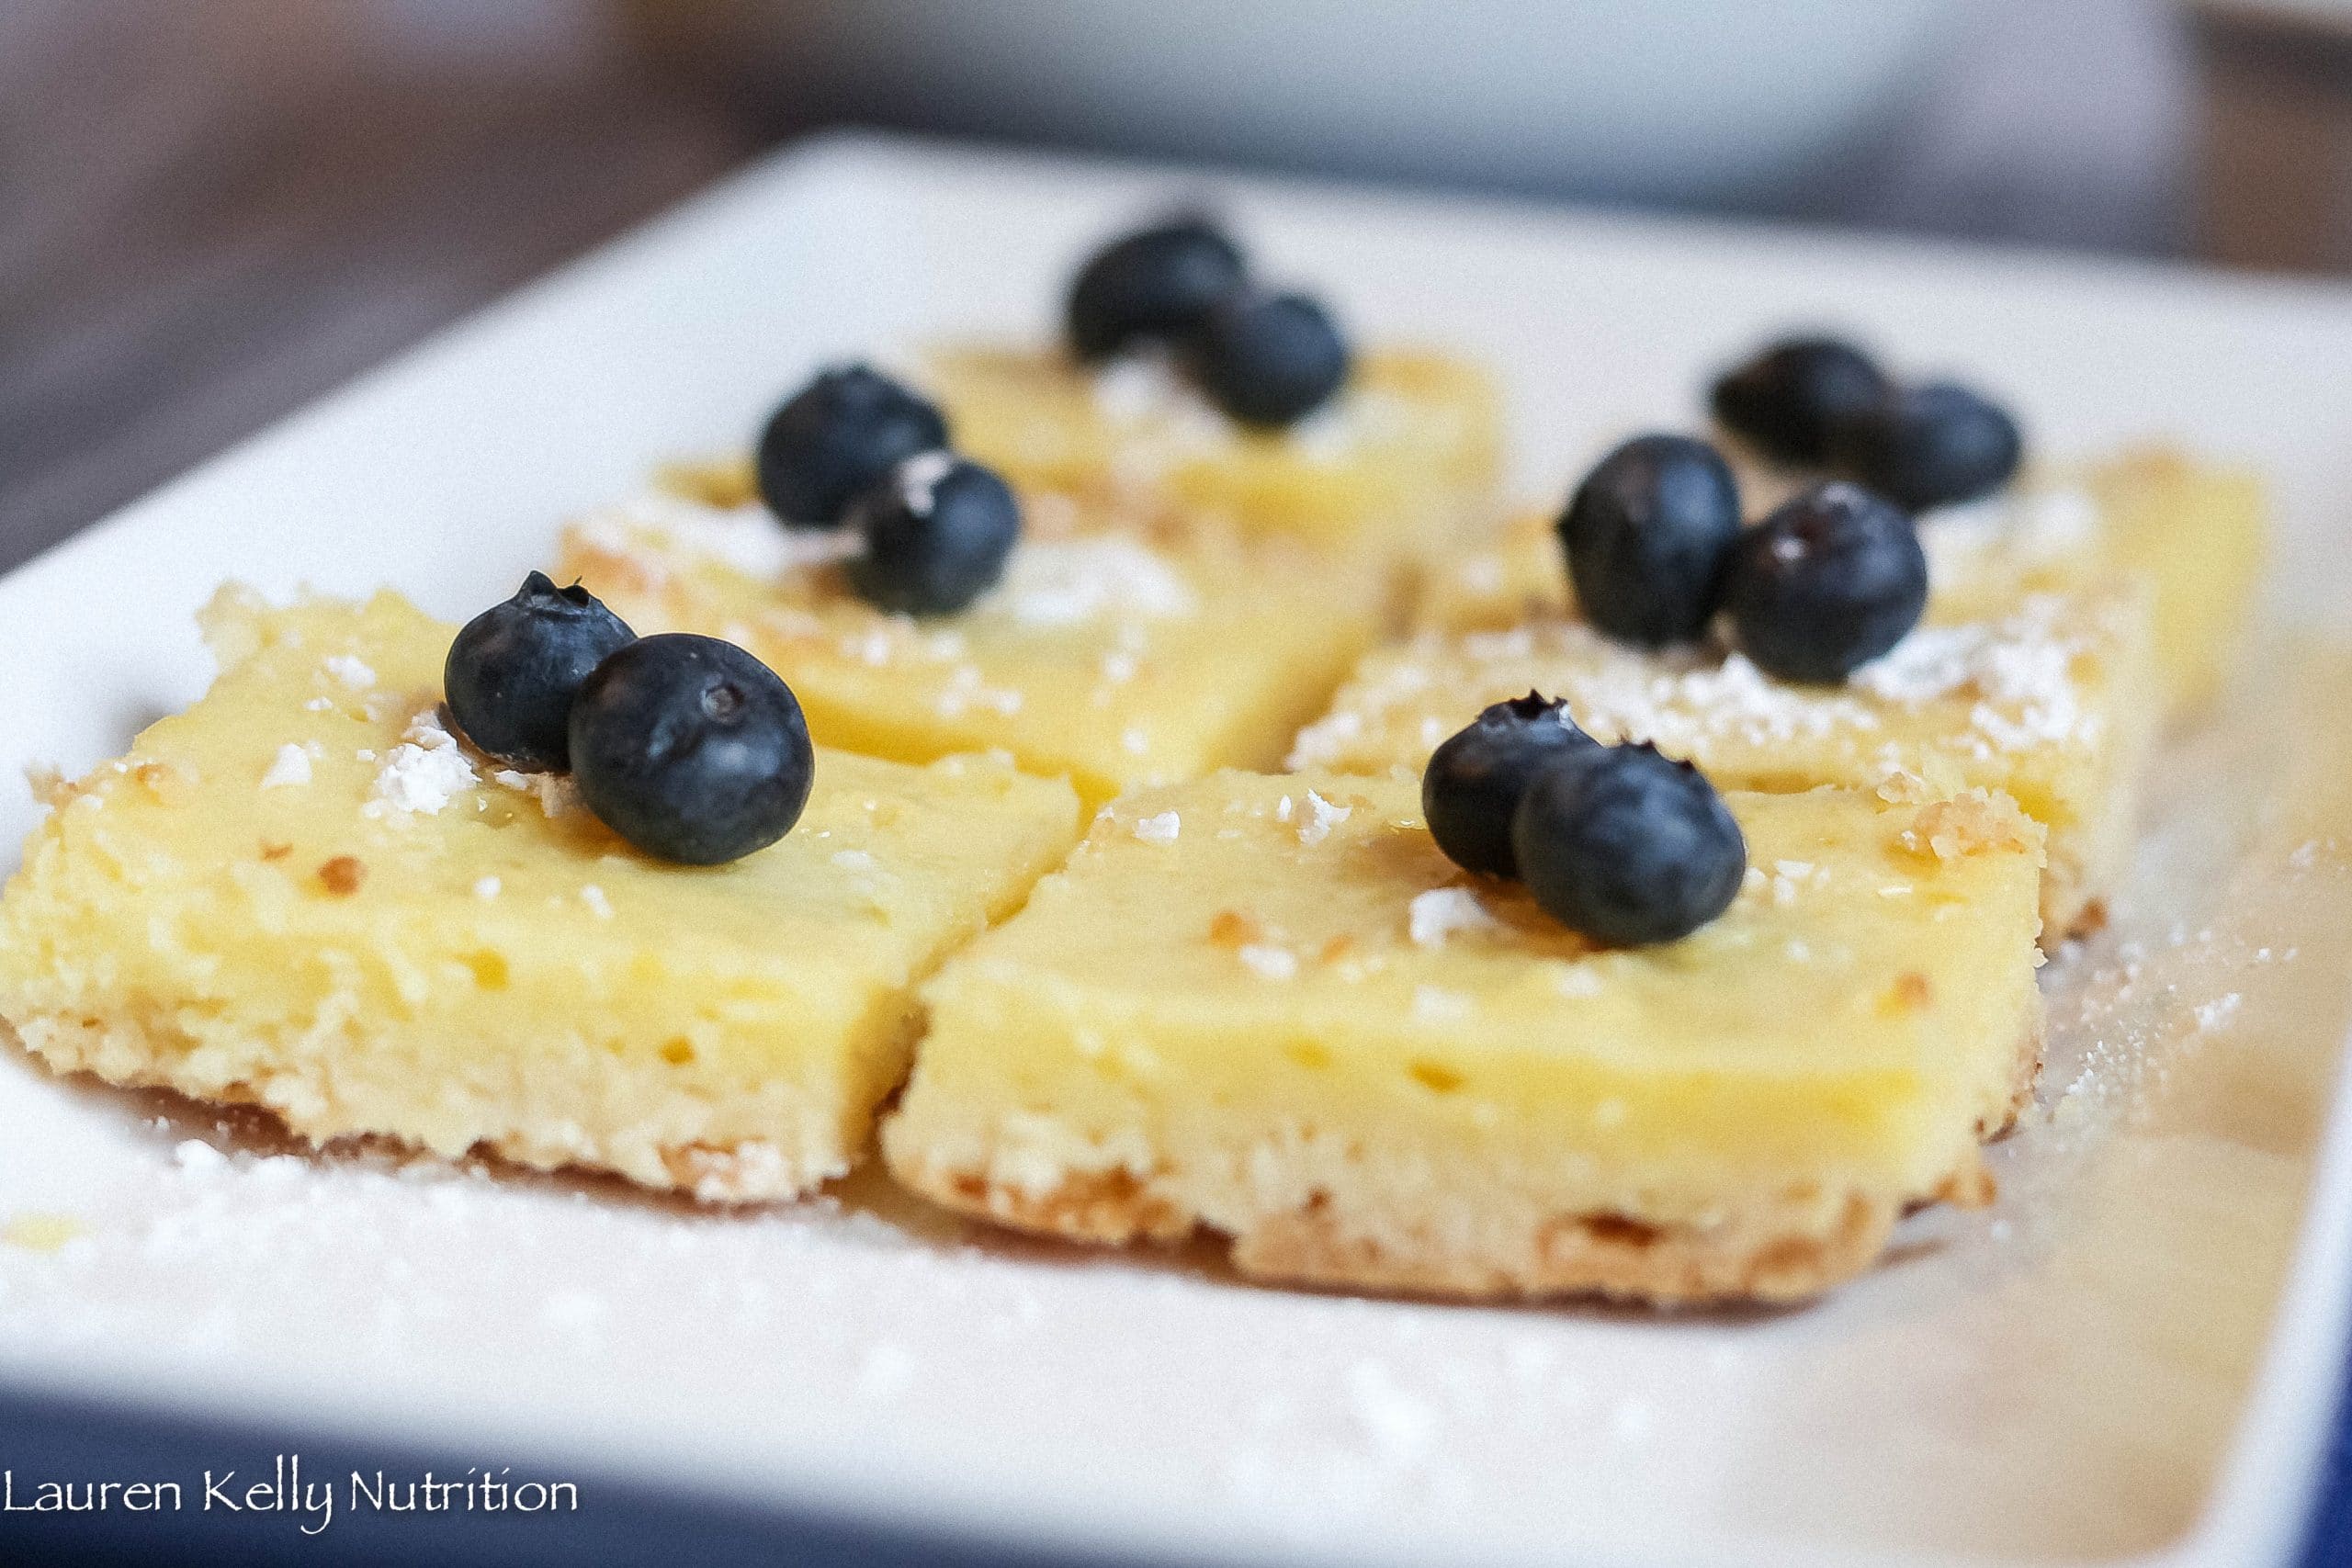 Horizontal picture of lemon bars with blueberries on top on a white plate.